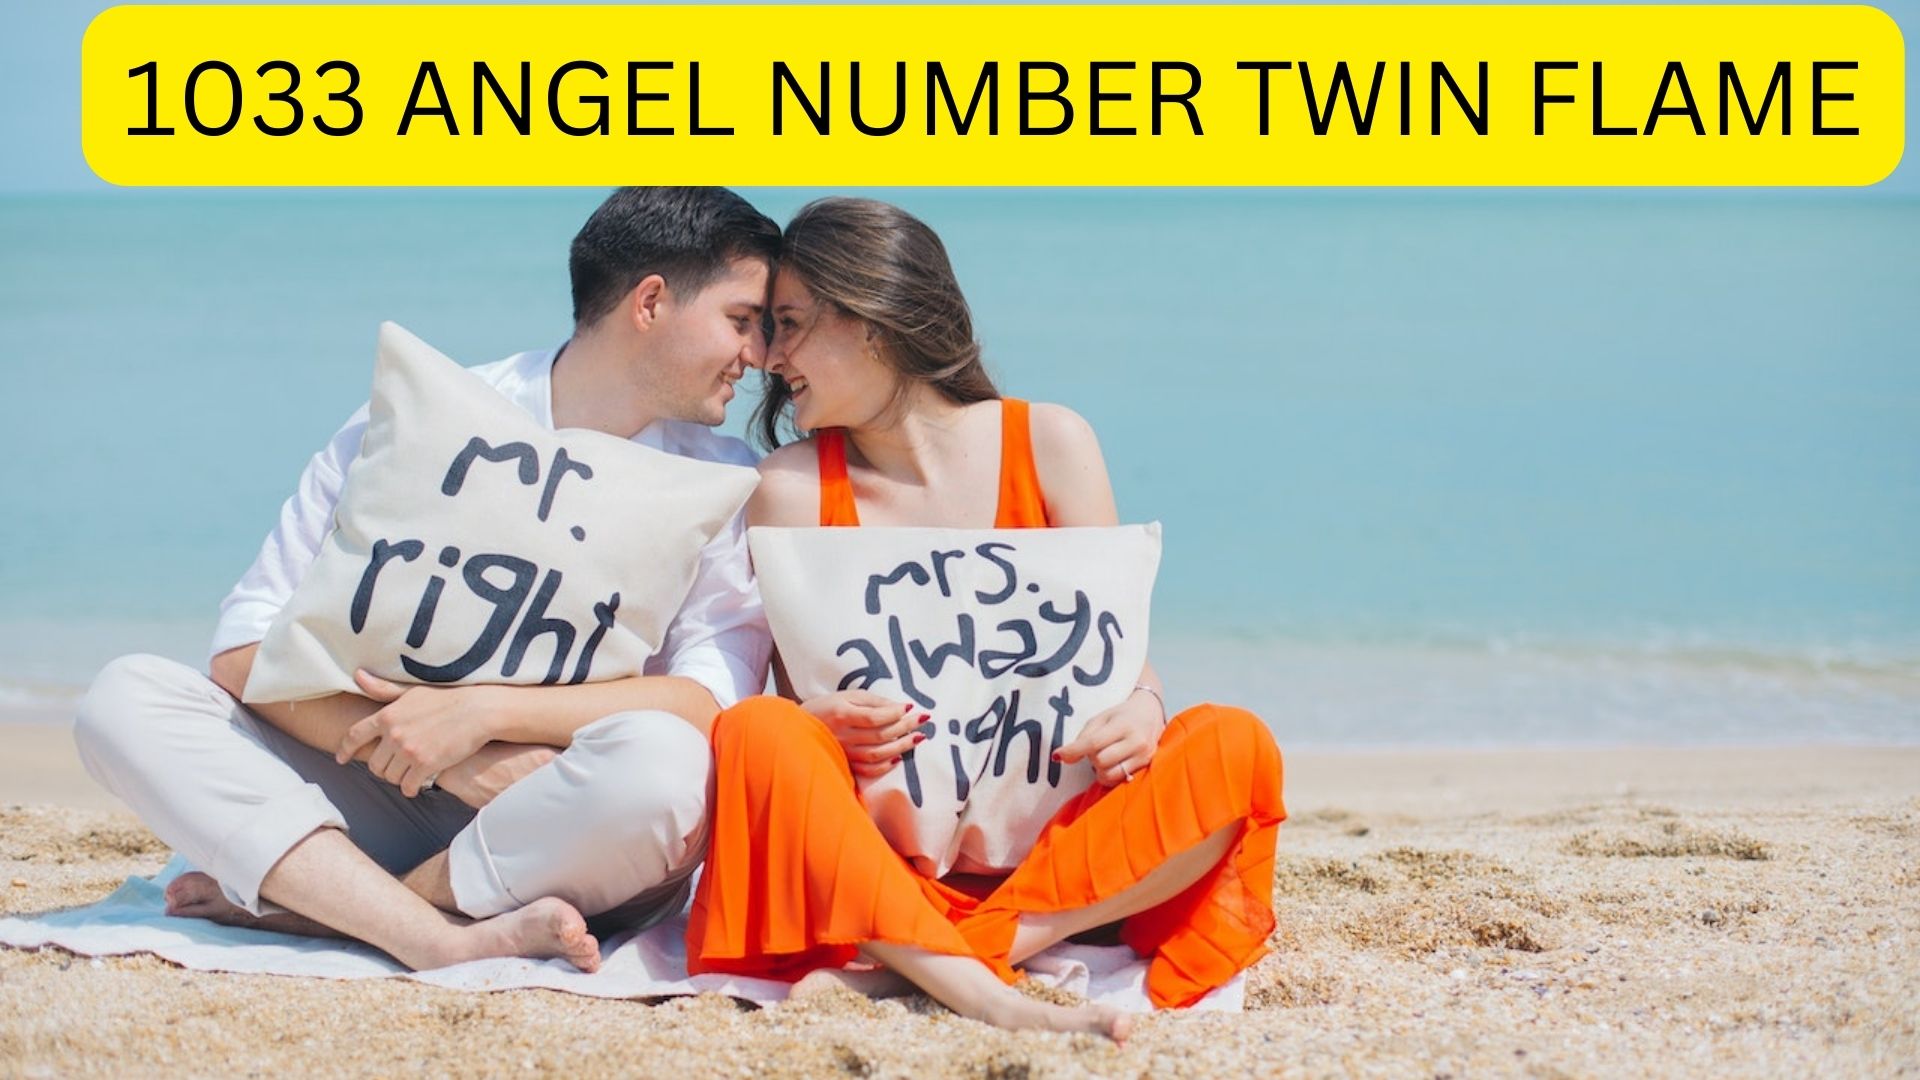 1033 Angel Number Twin Flame - A Valuable Message For You